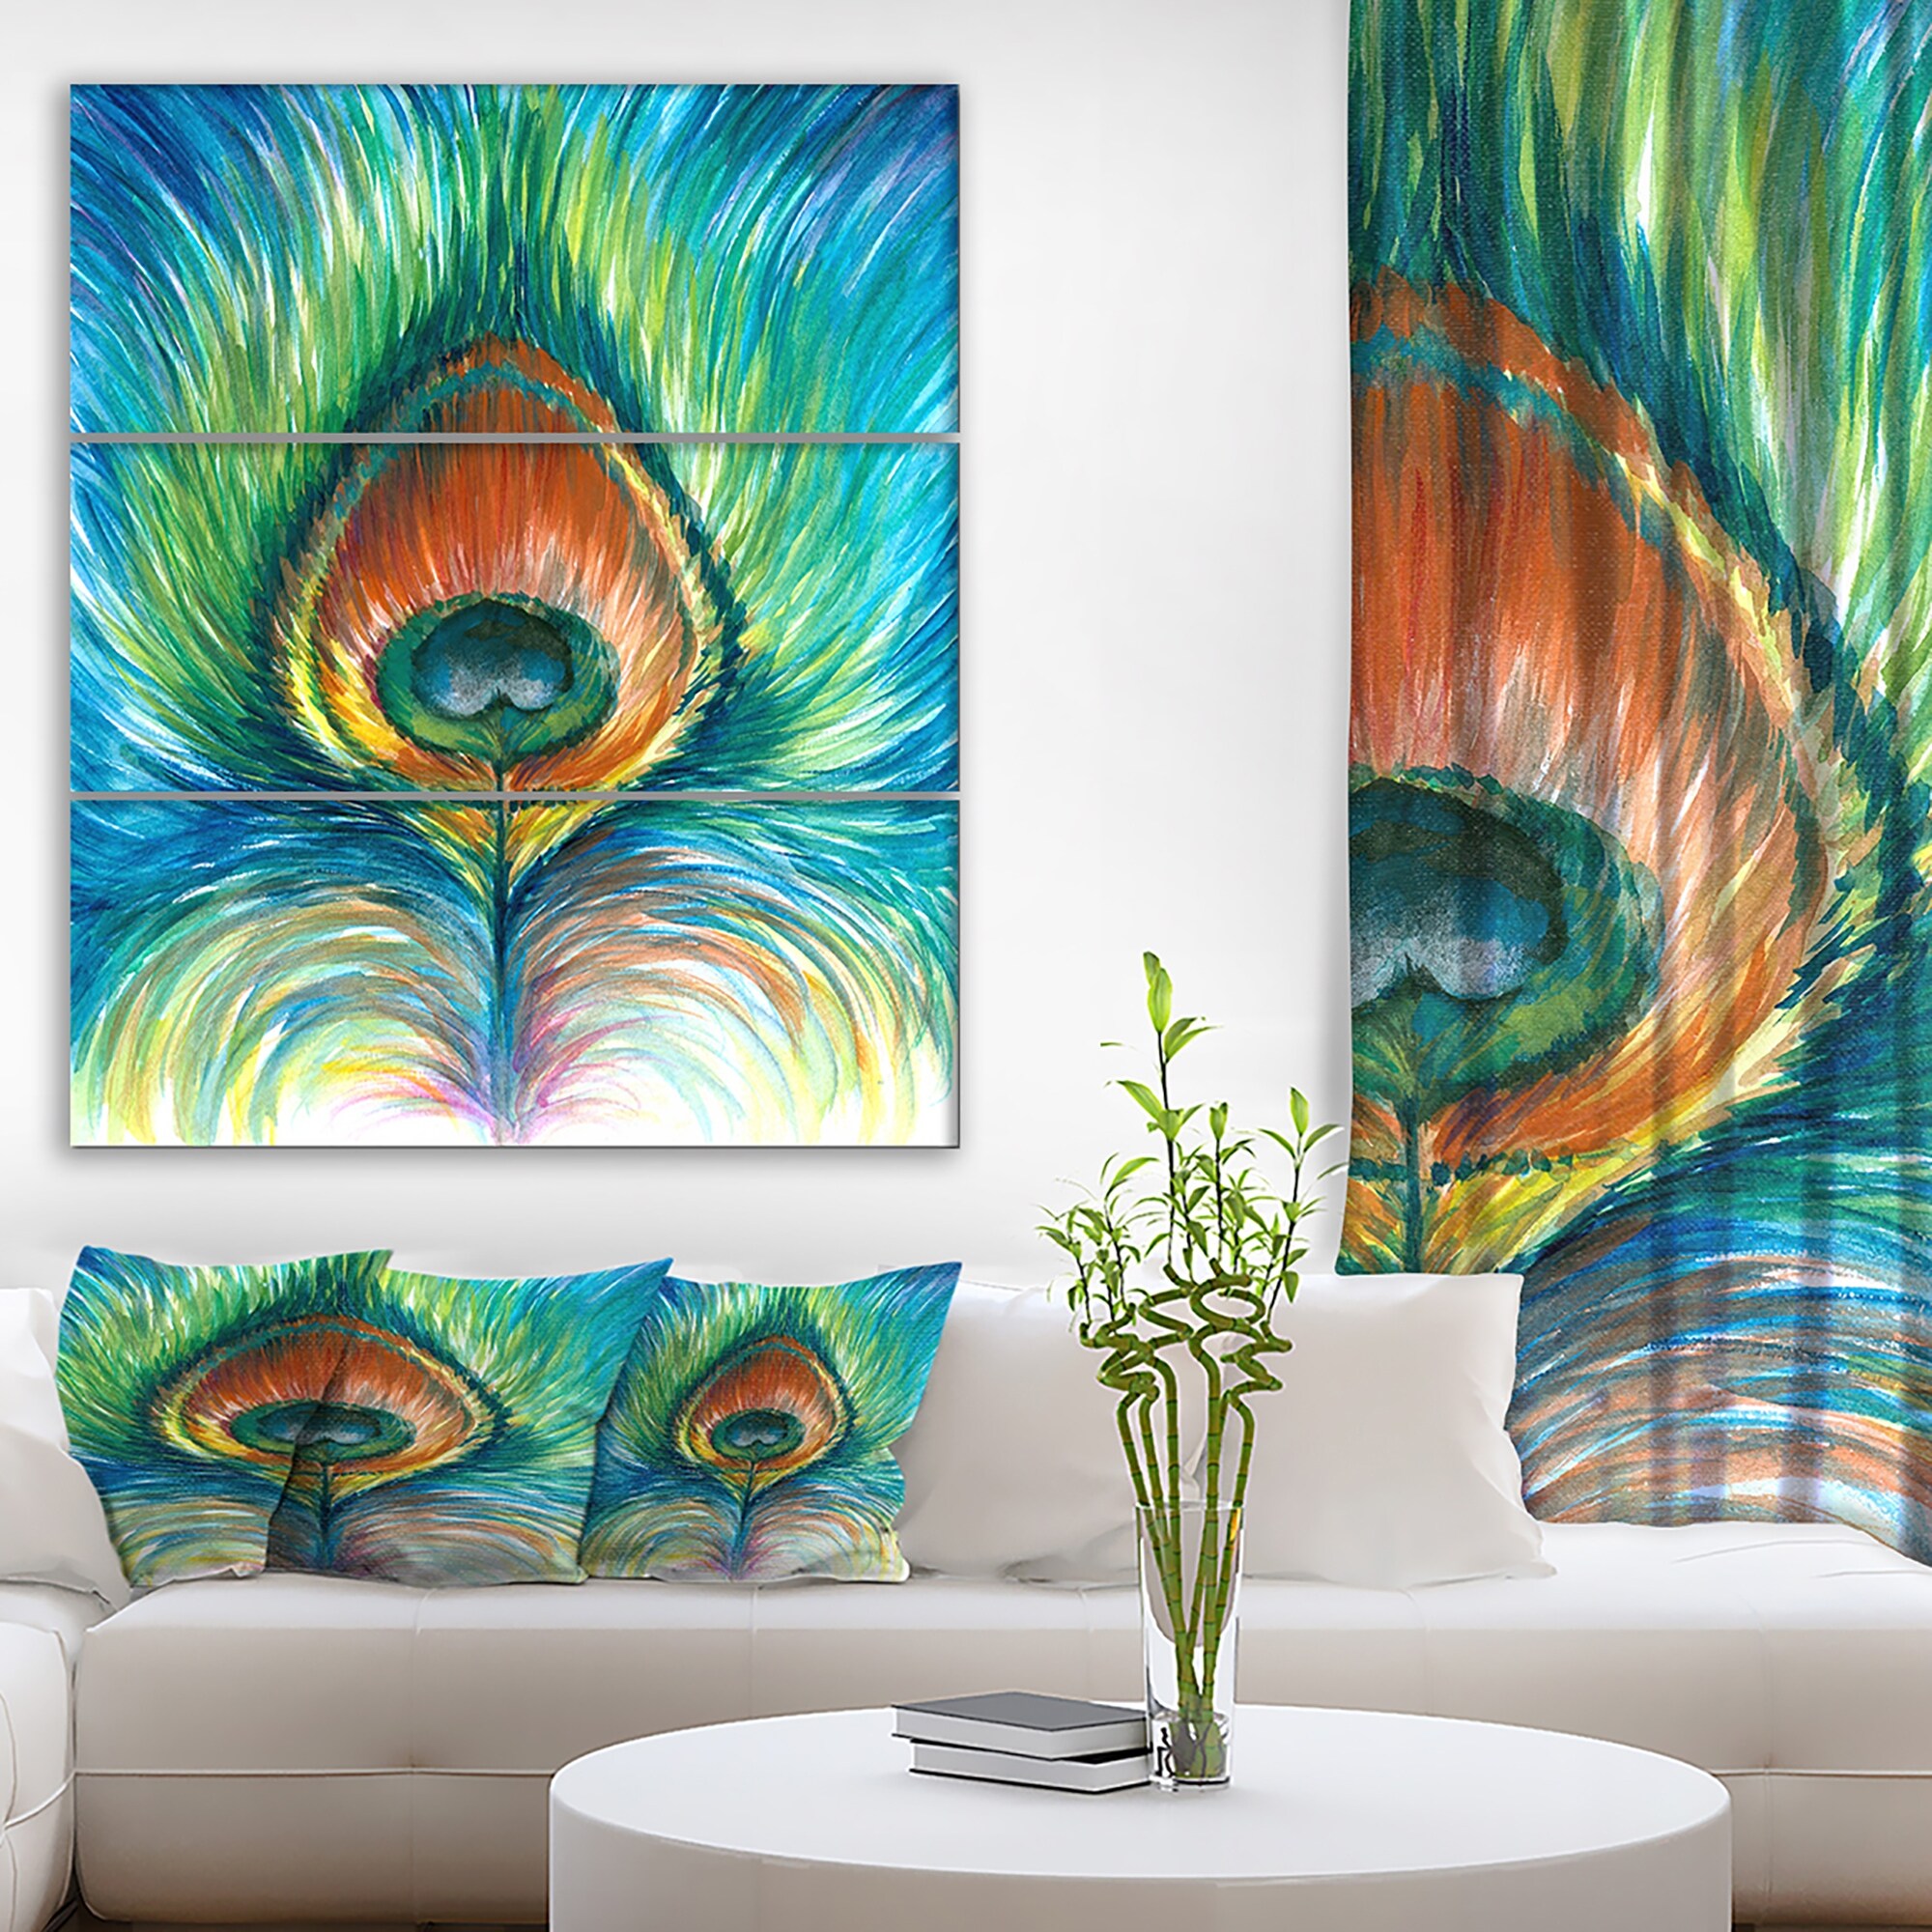 https://ak1.ostkcdn.com/images/products/is/images/direct/2f1bf51b65fe1b956737bd82f98907ff54a3c6d5/Designart-%27Peacock-feather%27-Contemporary-Animals-Print-on-Wrapped-Canvas-set---28x36---3-Panels.jpg